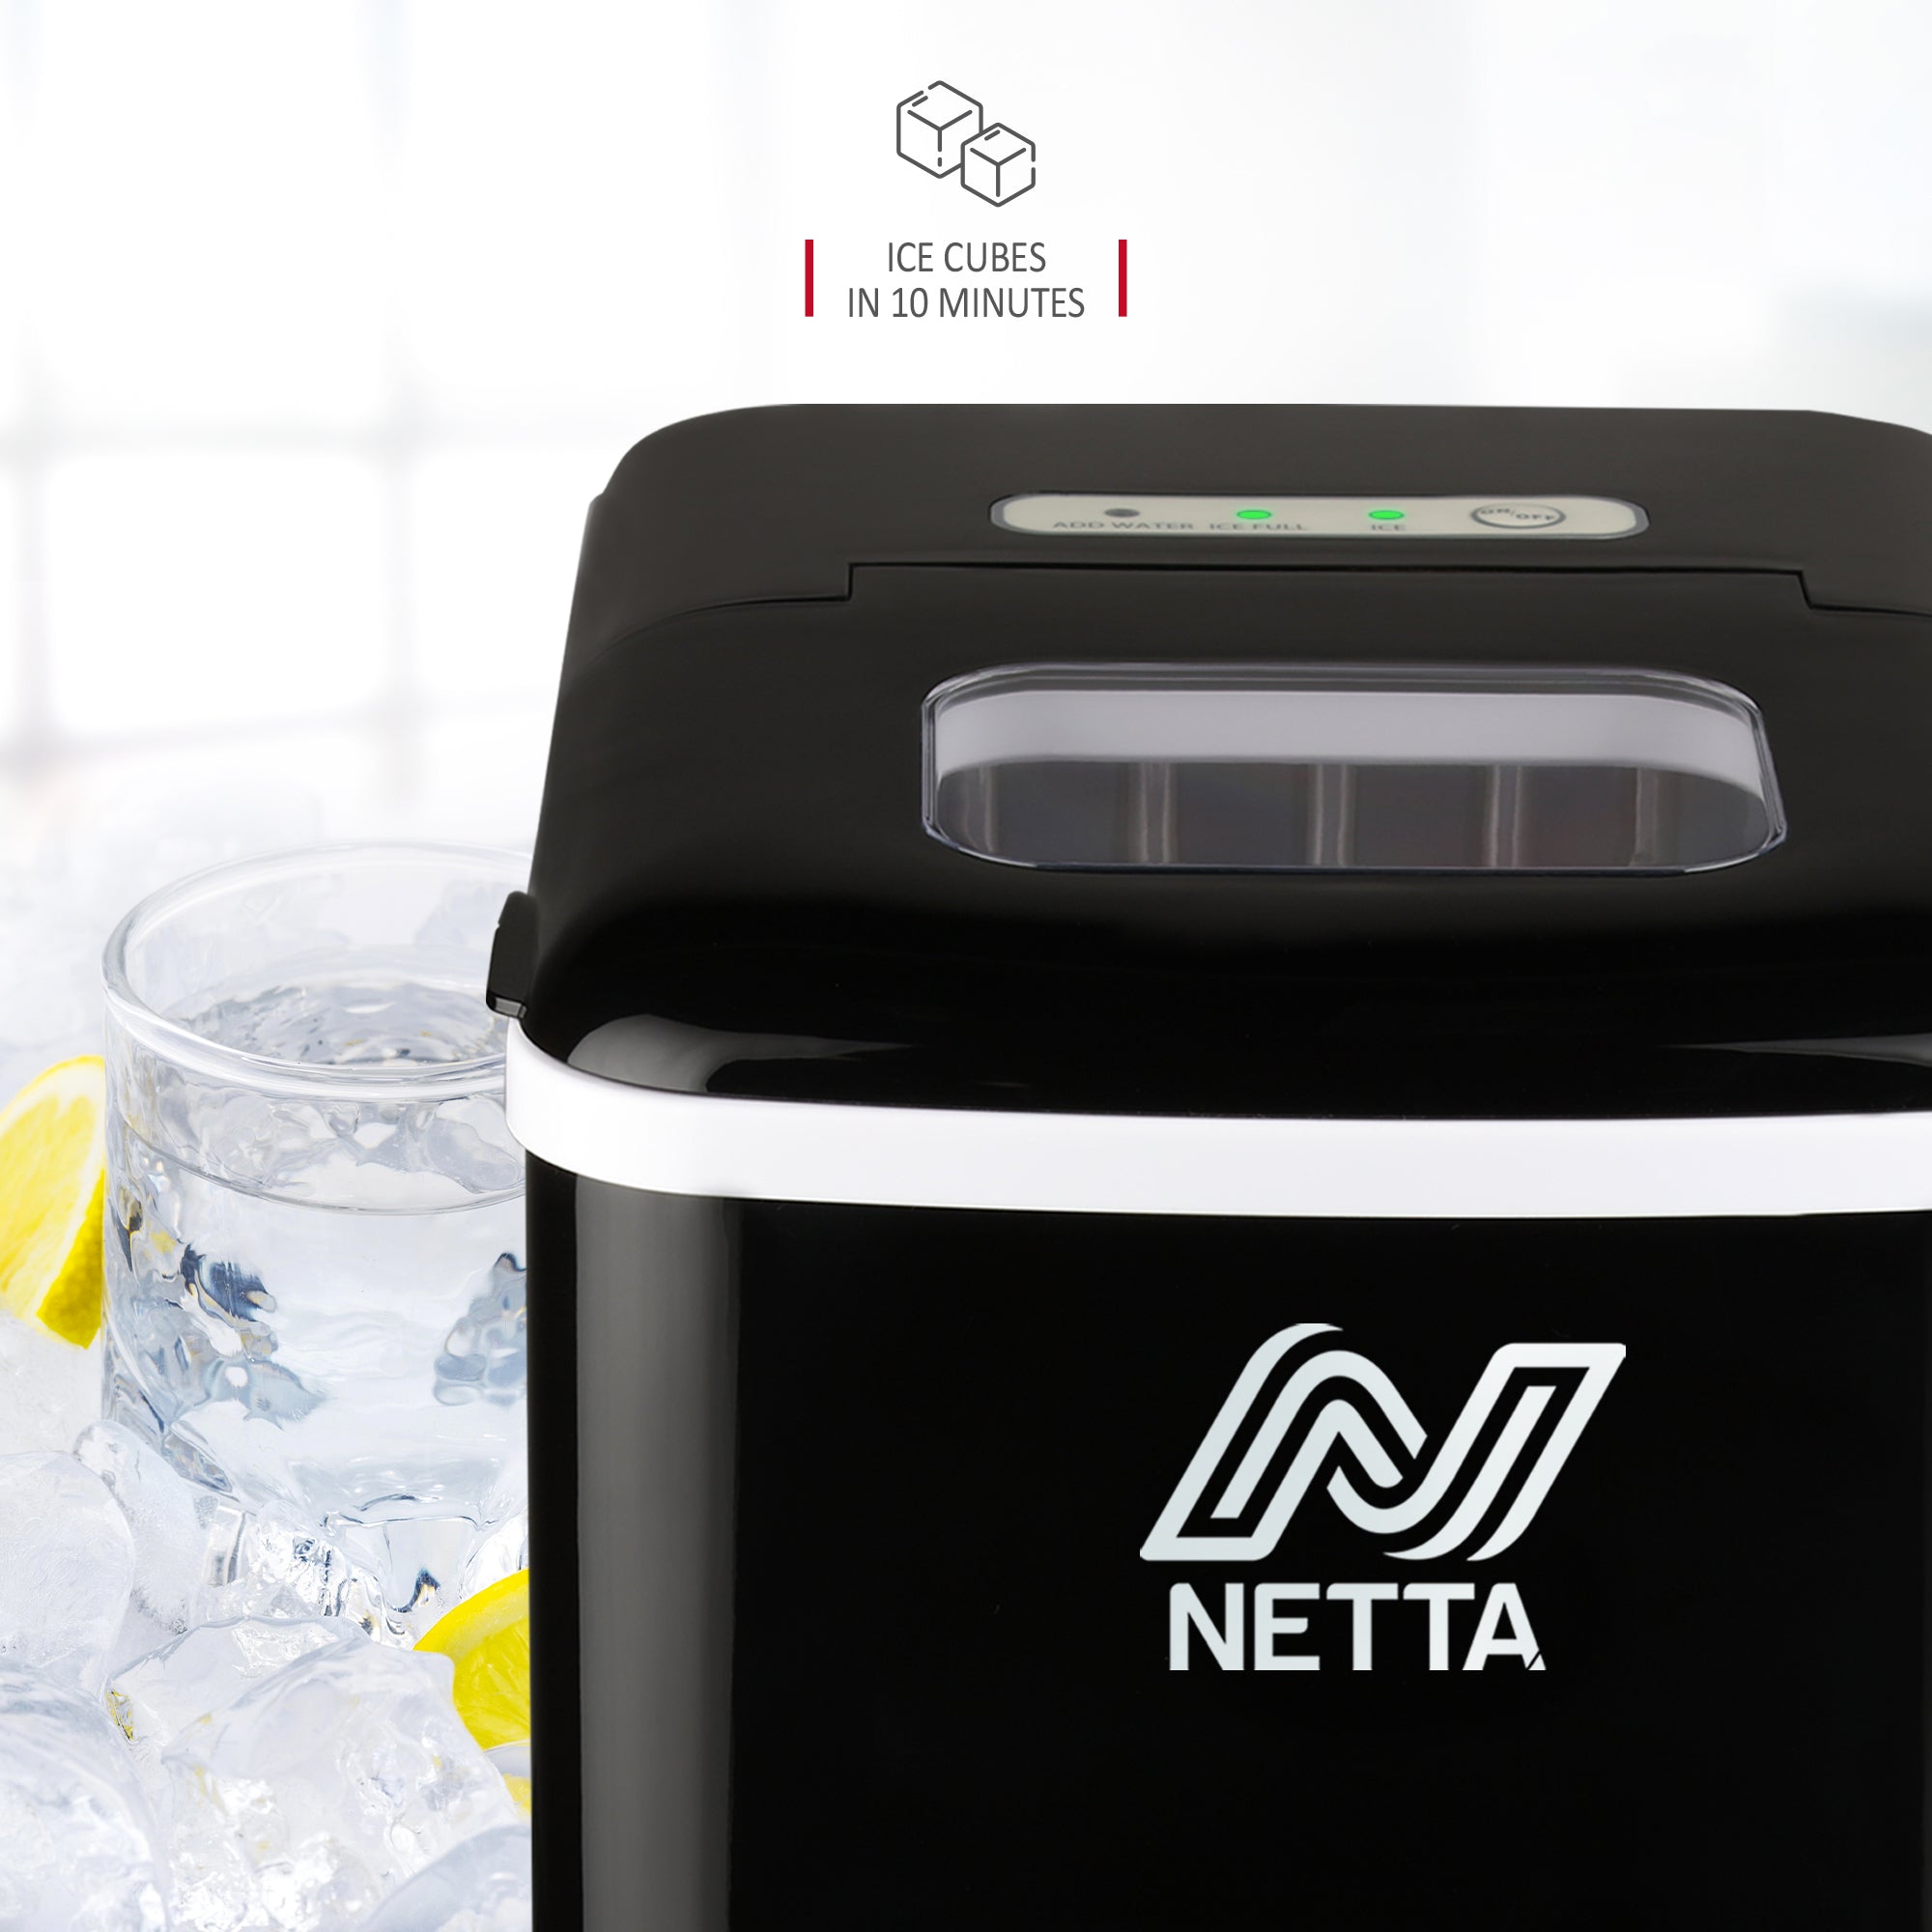 NETTA Ice Maker Machine with 1.8L Tank - Makes 12KG of Ice per Day - Black